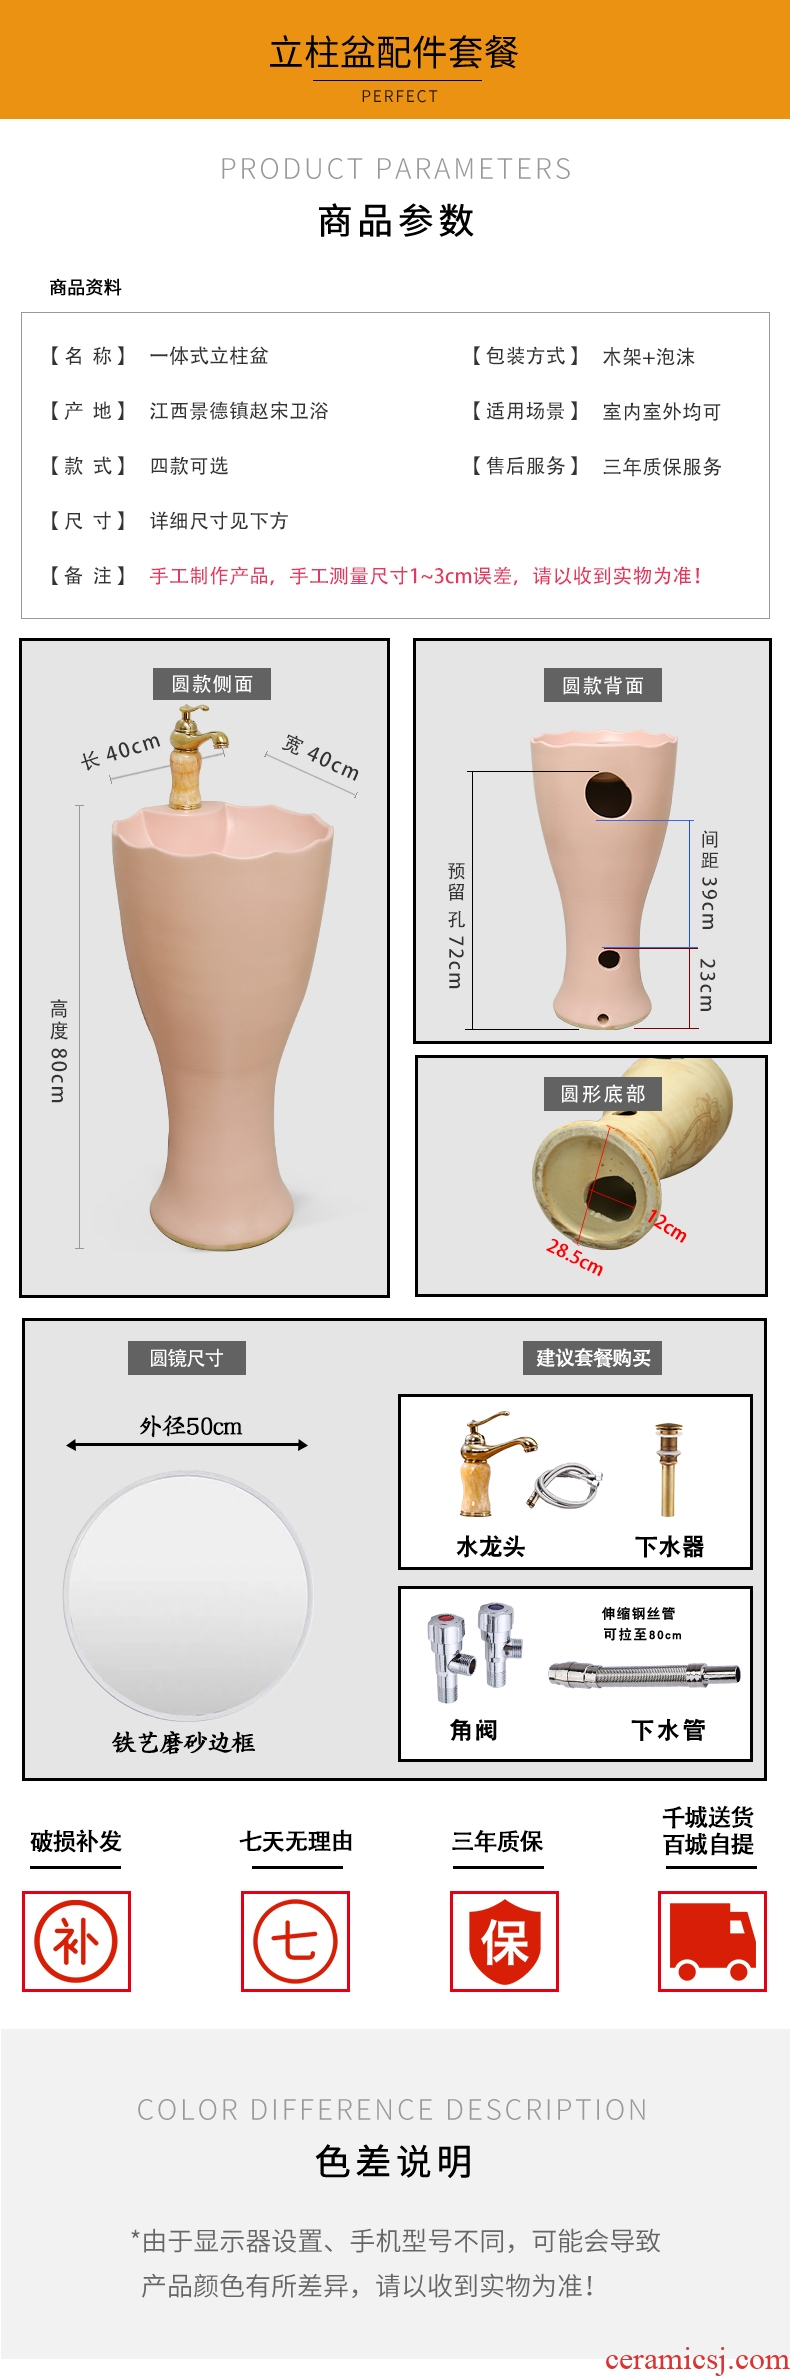 Northern wind of song dynasty porcelain column basin one - piece household lavabo floor type lavatory sink is suing